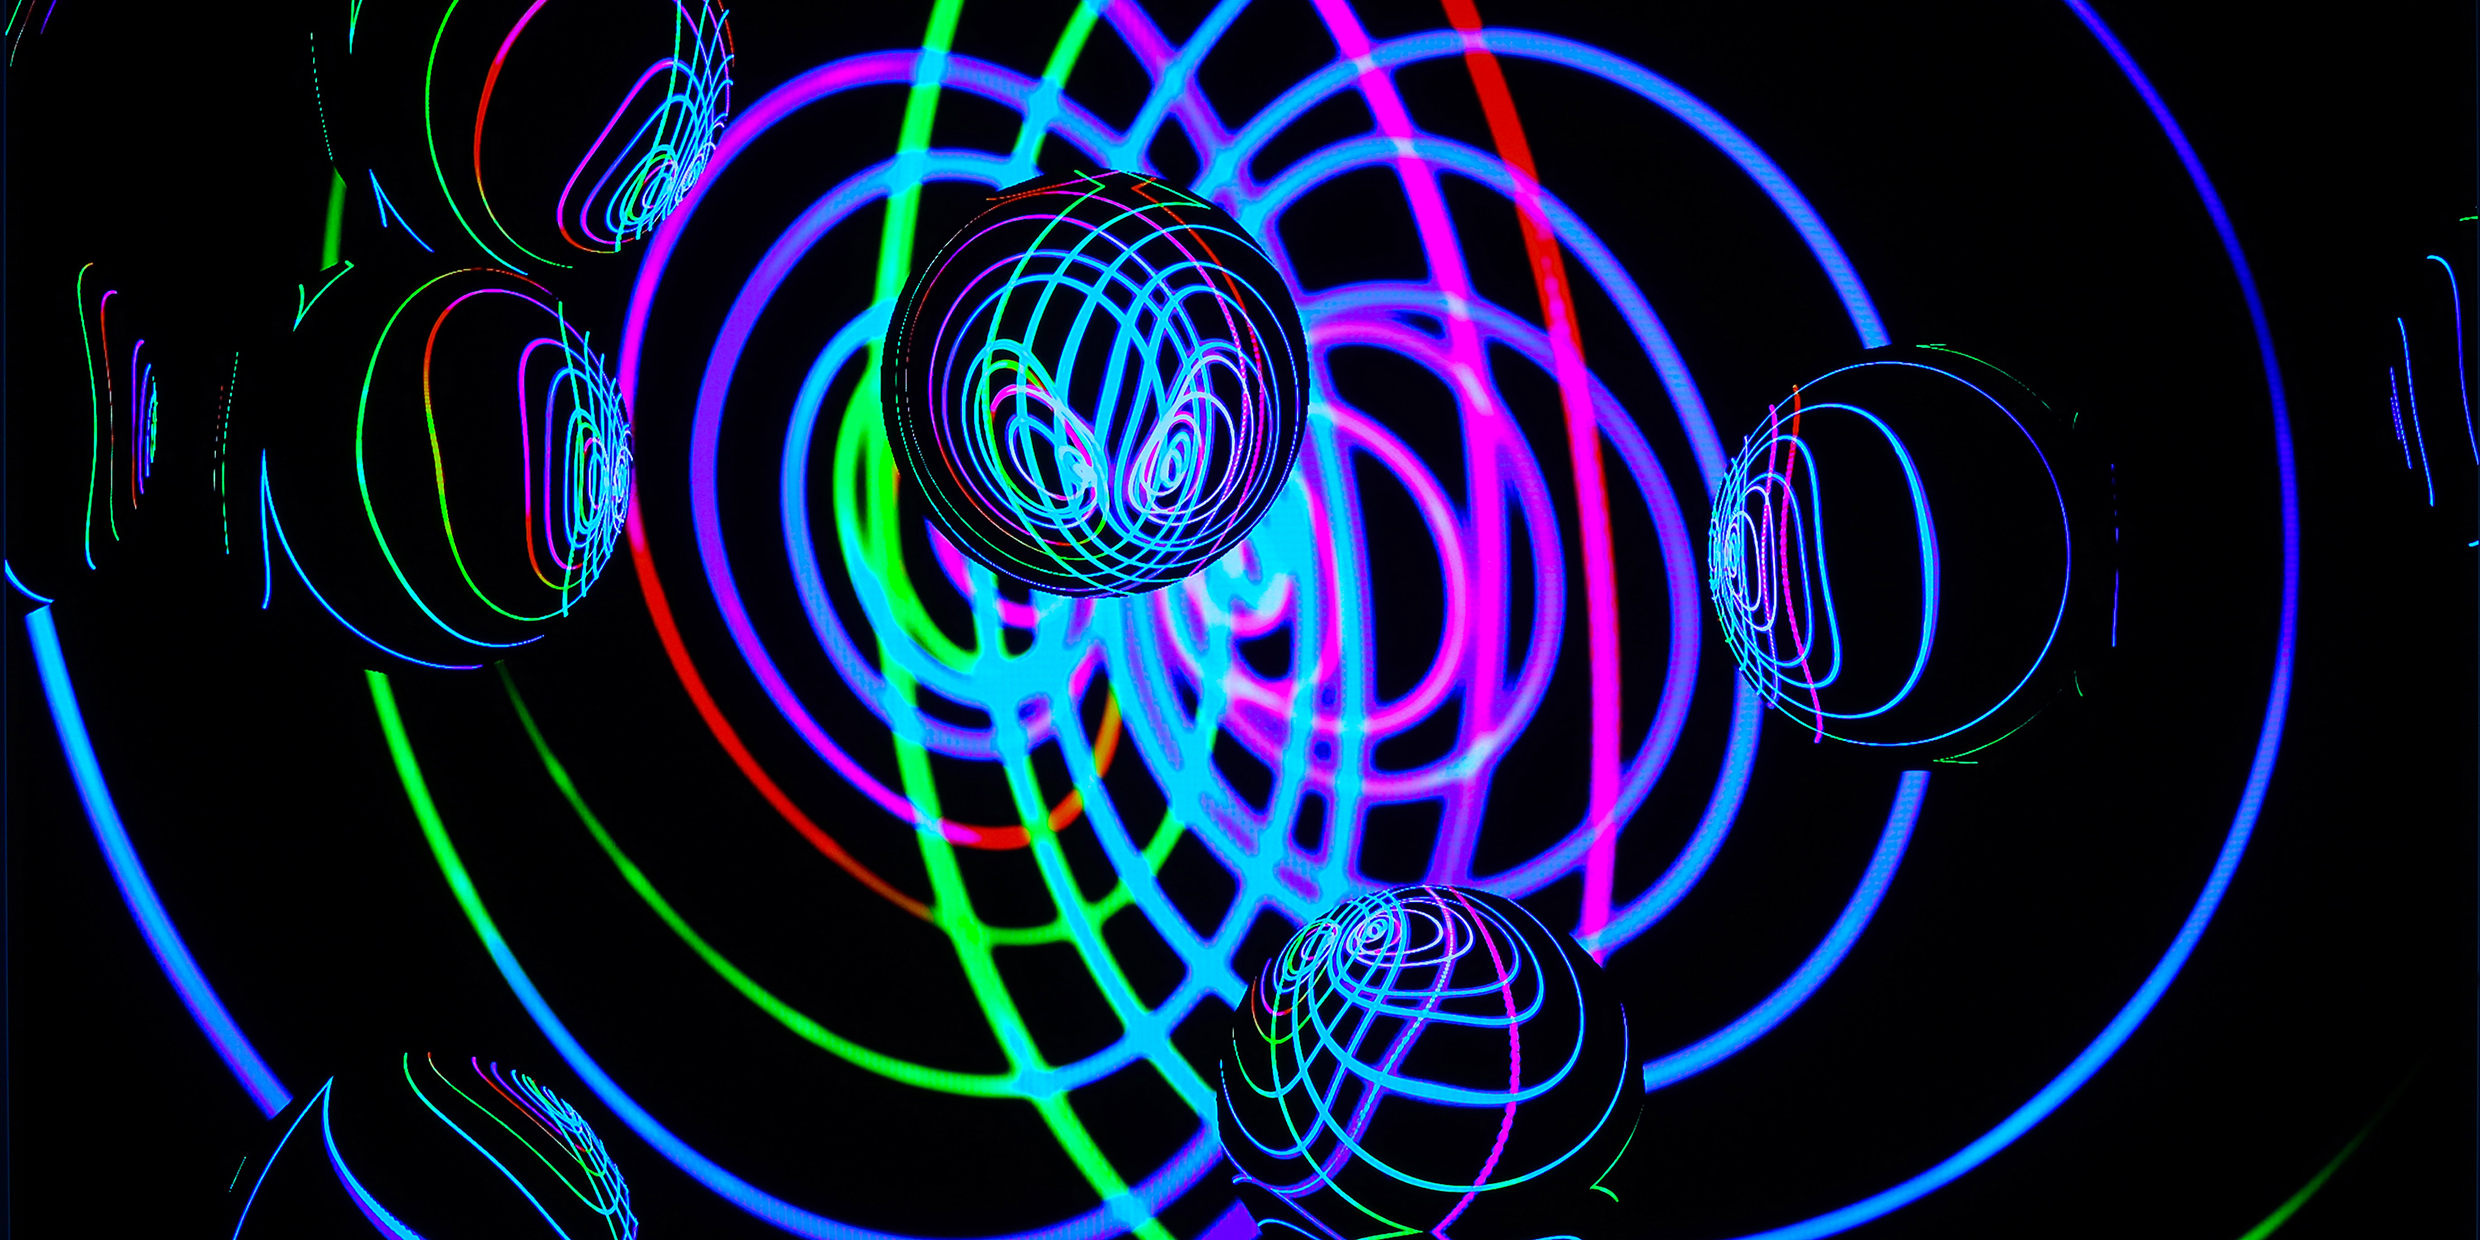 Artistic image of glowing loops of light